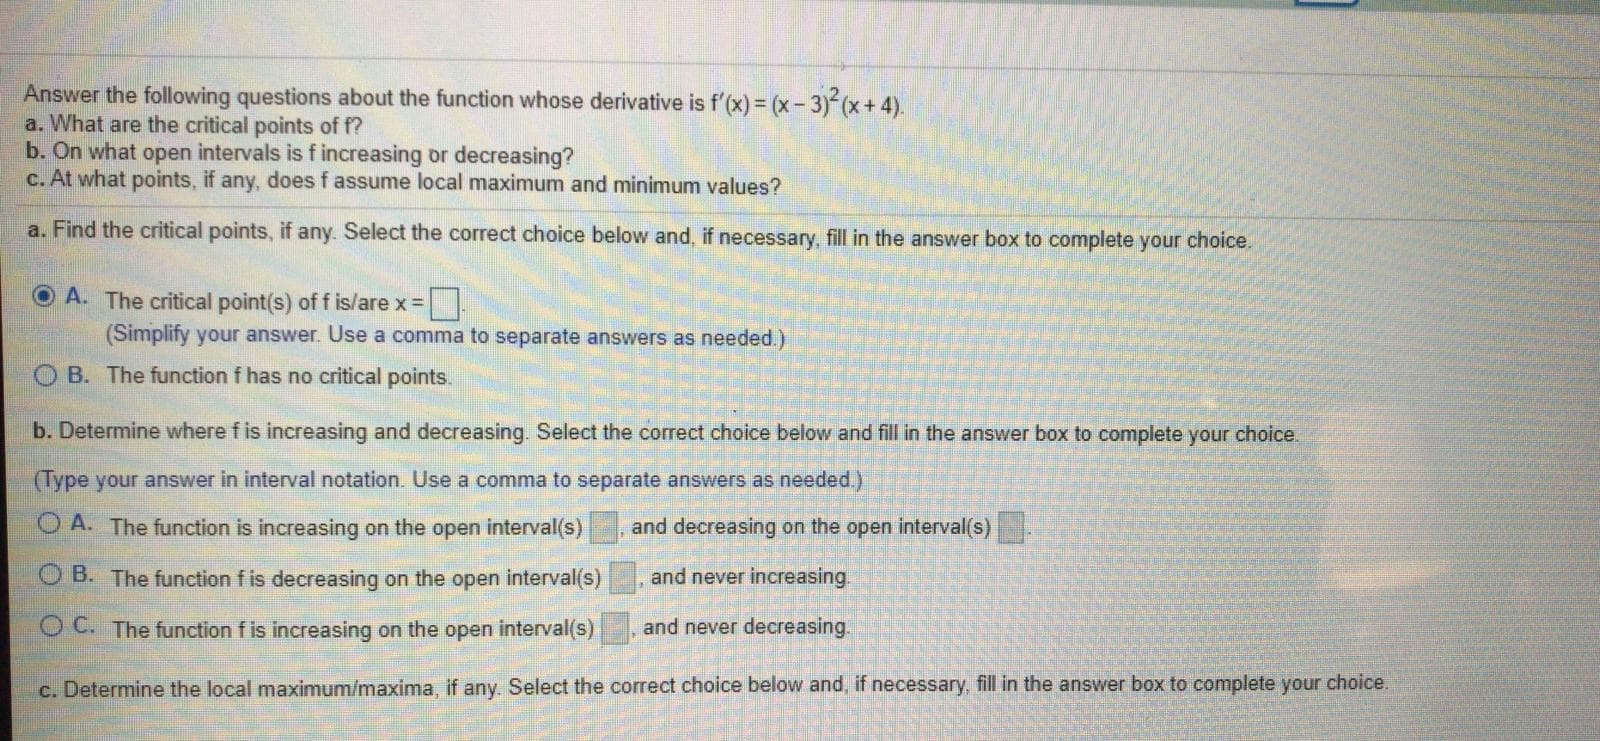 Answer the following questions about the function whose derivative is f'(x) = (x-3) (x+ 4).
a. What are the critical points of f?
b. On what open intervals is fincreasing or decreasing?
c. At what points, if any, does f assume local maximum and minimum values?
a. Find the critical points, if any. Select the correct choice below and, if necessary, fill in the answer box to complete your choice.
O A. The critical point(s) of f is/are x =
(Simplify your answer. Use a comma to separate answers as needed.)
O B. The function f has no critical points.
b. Determine where f is increasing and decreasing. Select the correct choice below and fill in the answer box to complete your choice.
(Type your answer in interval notation. Use a comma to separate answers as needed.)
A. The function is increasing on the open interval(s)
and decreasing on the open interval(s)
O B. The function f is decreasing on the open interval(s)
and never increasing.
O C. The function f is increasing on the open interval(s)
and never decreasing.
c. Determine the local maximum/maxima, if any. Select the correct choice below and, if necessary, fill in the answer box to complete your choice.
